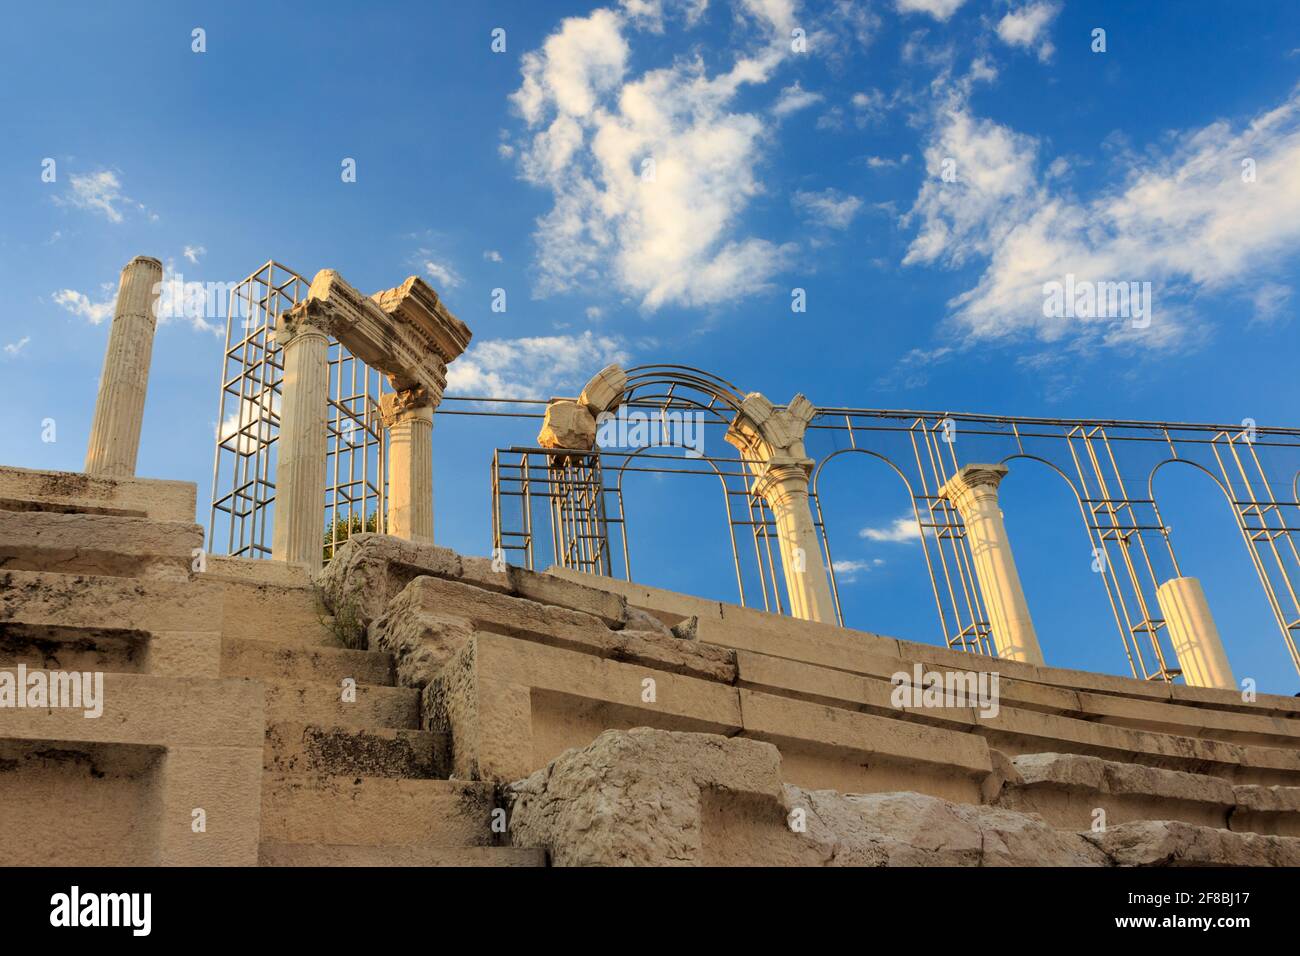 Ruins of ancient roman amphitheater, used for gladiator fights Stock Photo